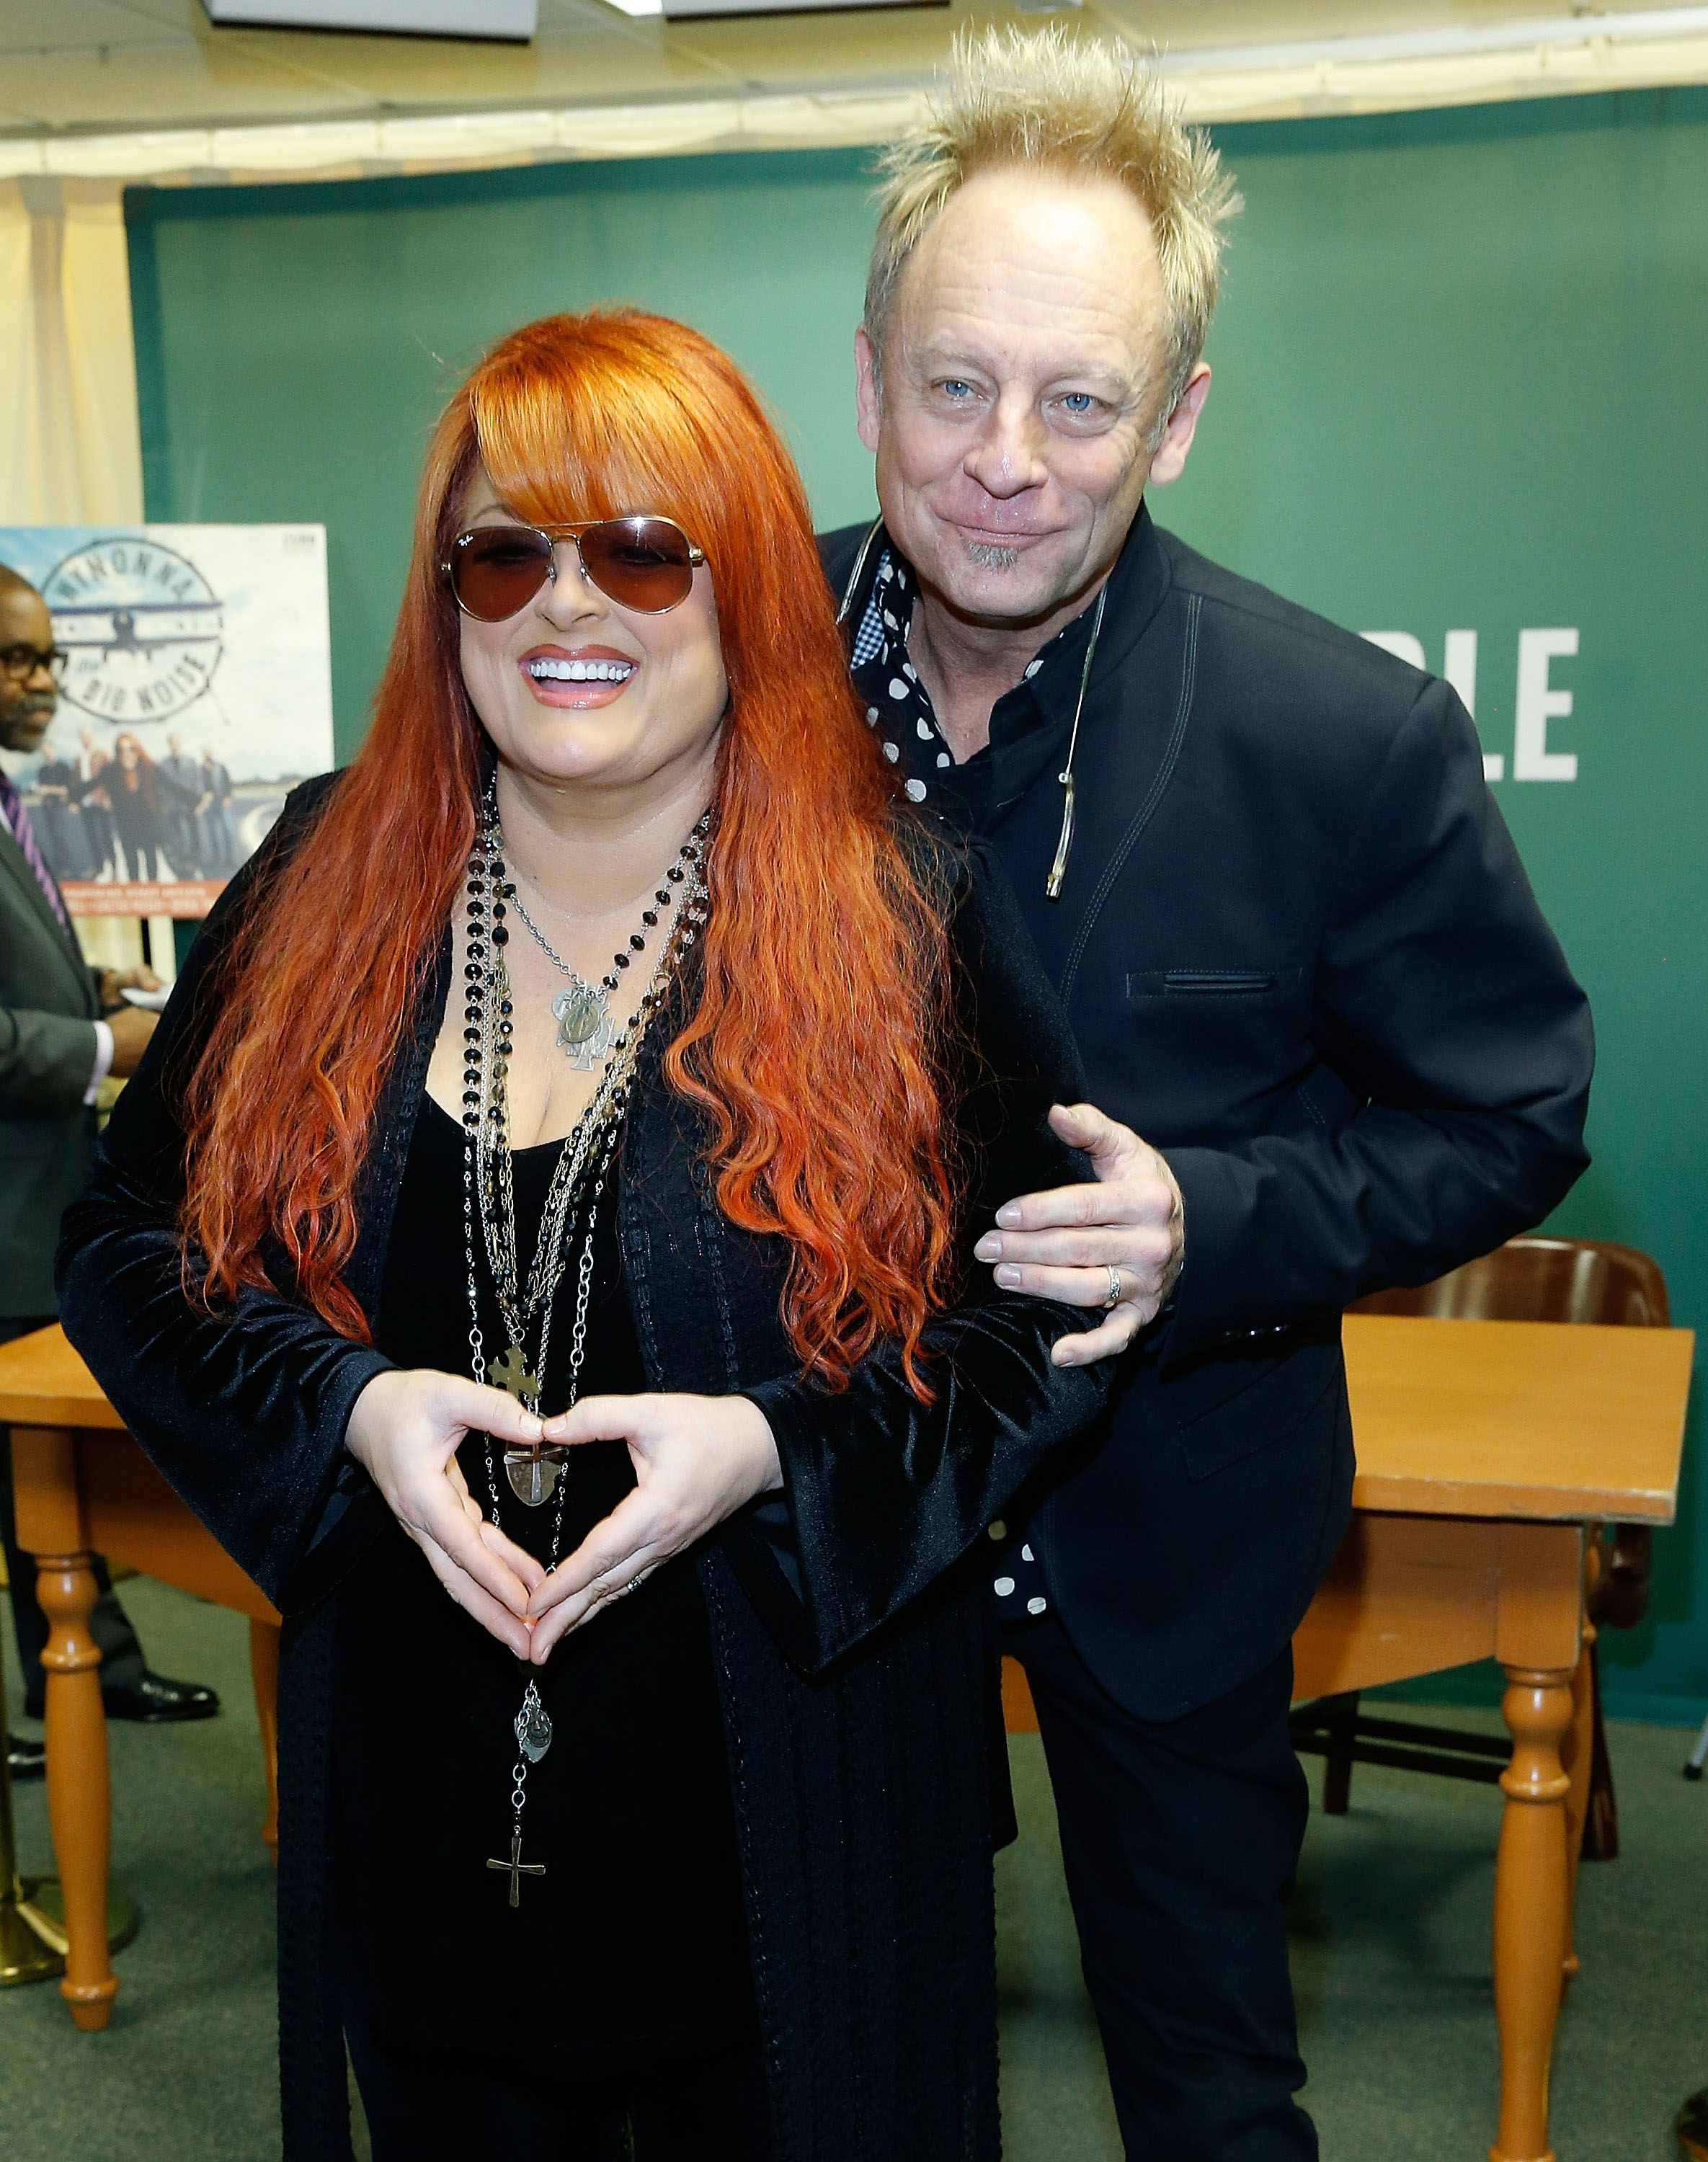 Wynonna Judd and Cactus Moser at her CD signing at Barnes & Noble in New York City, 2016 | Source: Getty Images